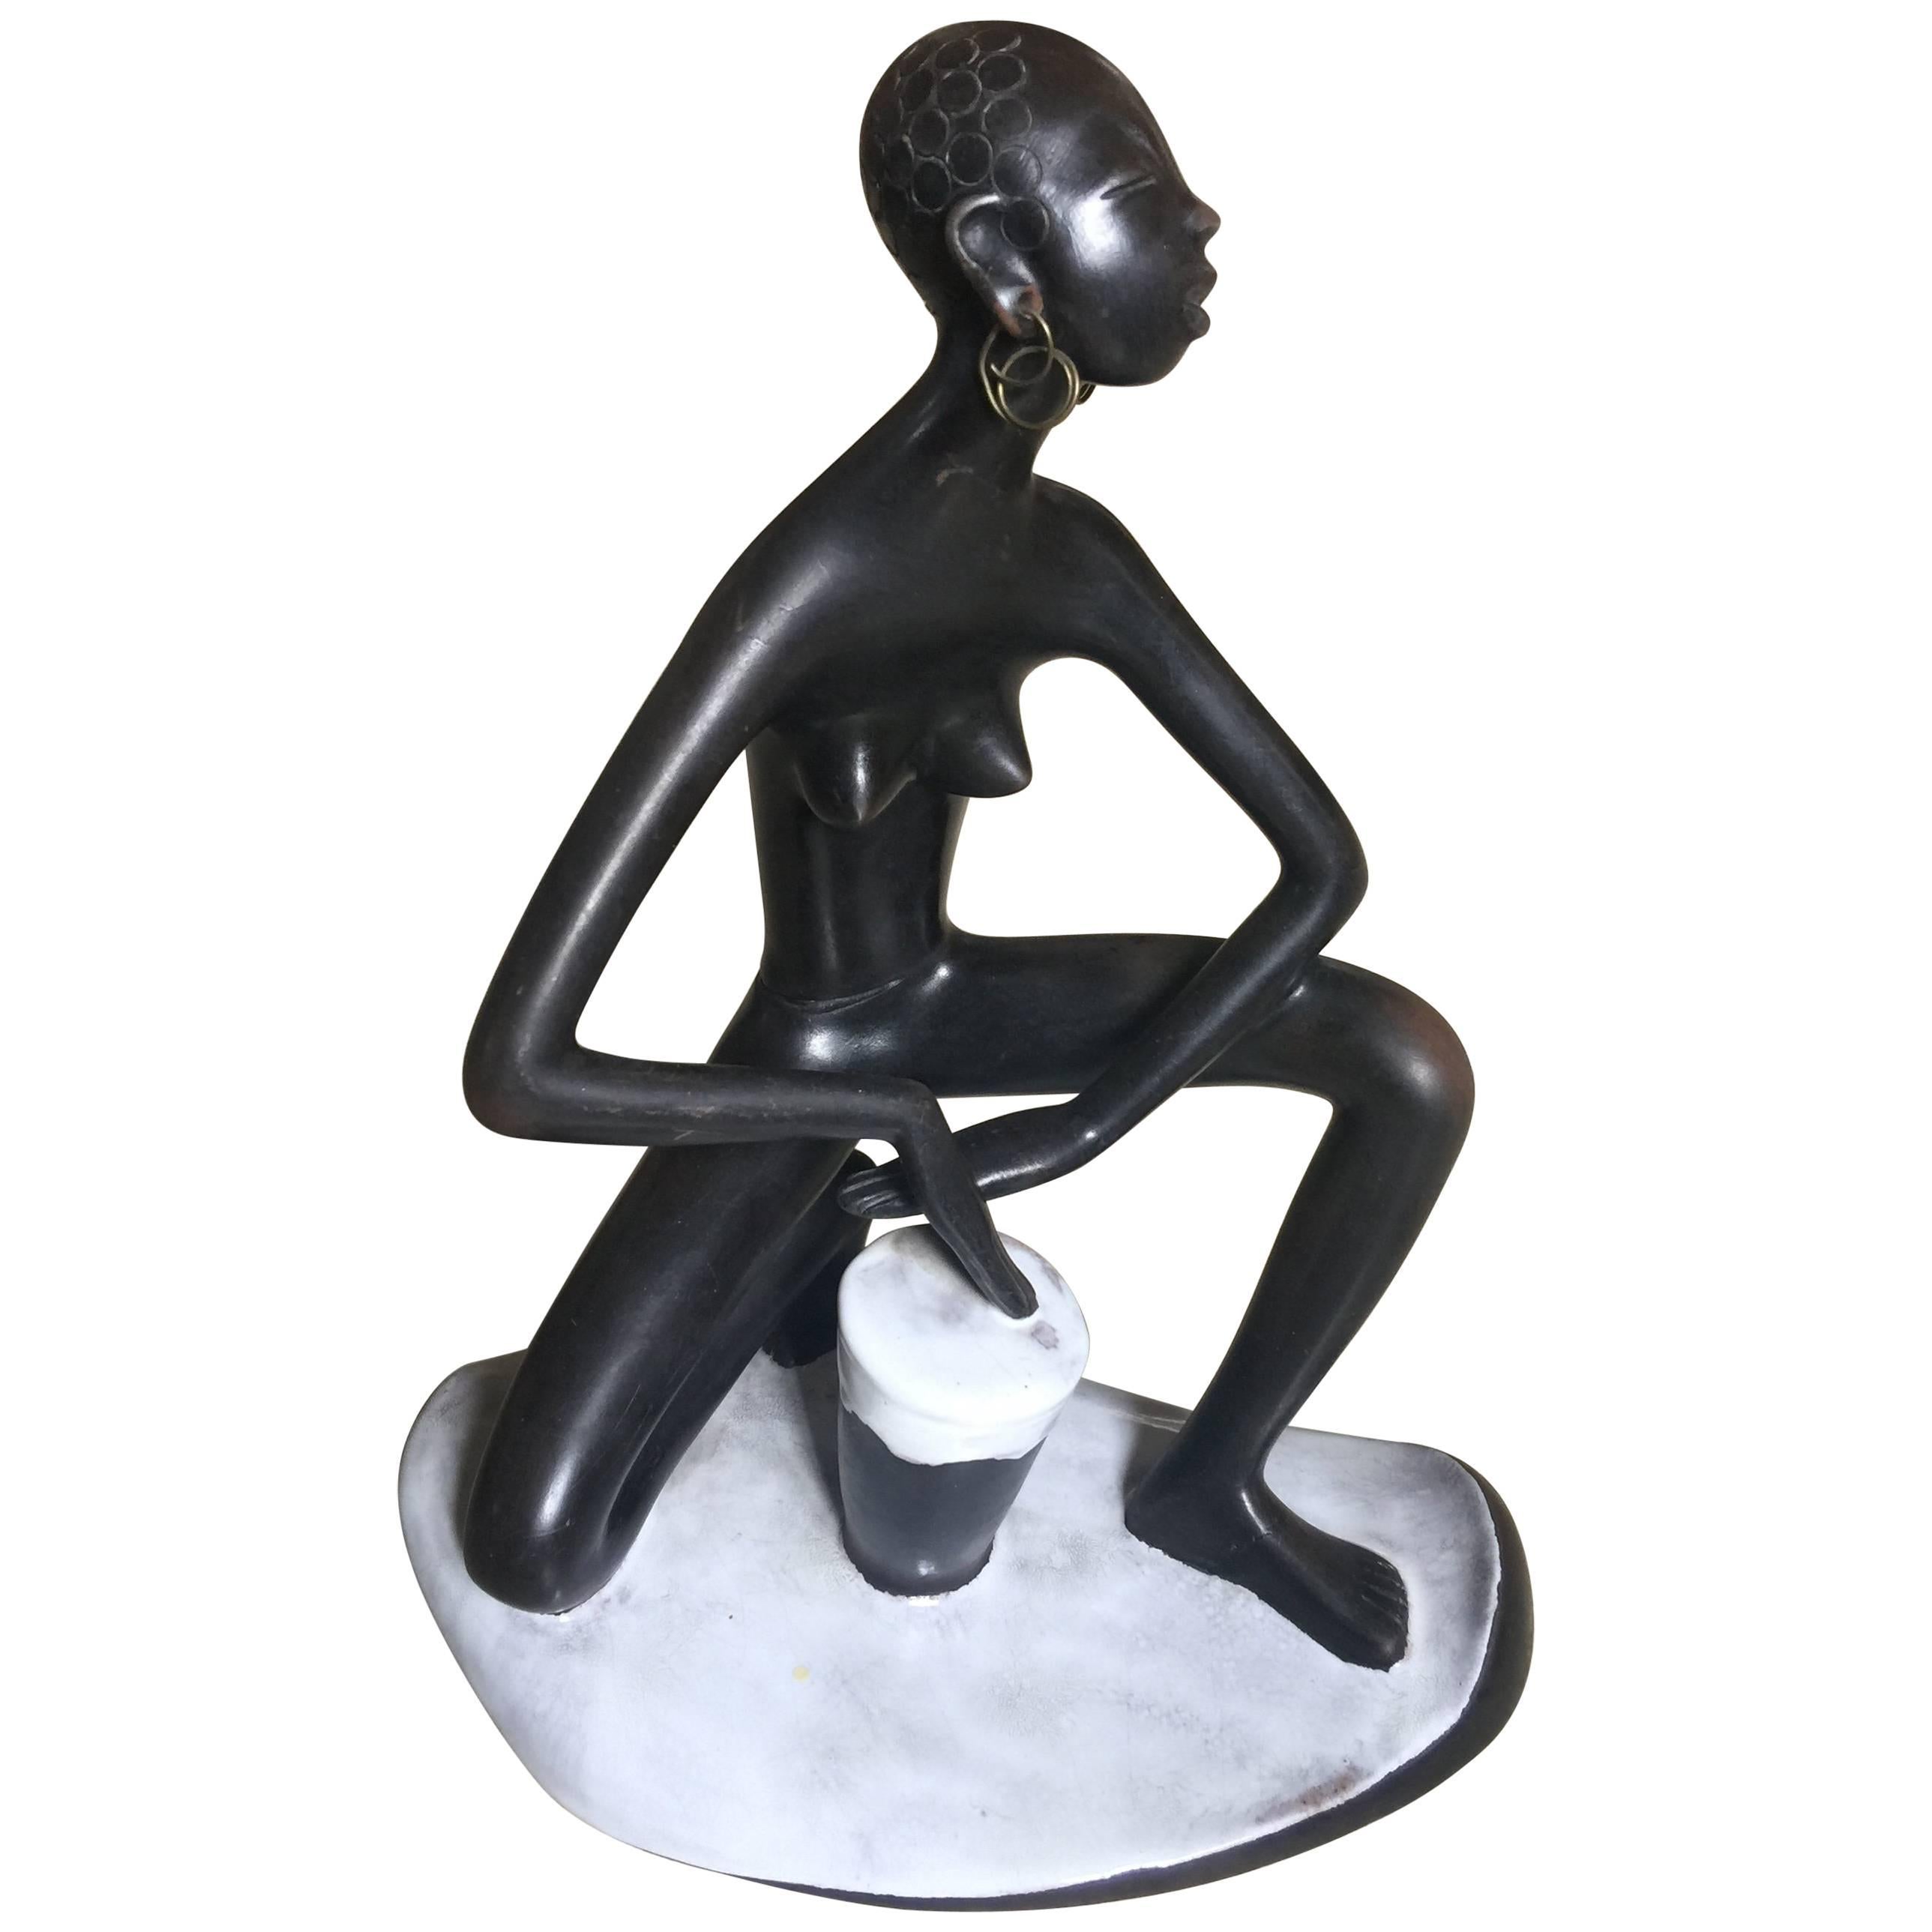 Leopold Anzengruber, Vienna, Made of Black-Finished Terra Cotta Pottery For Sale